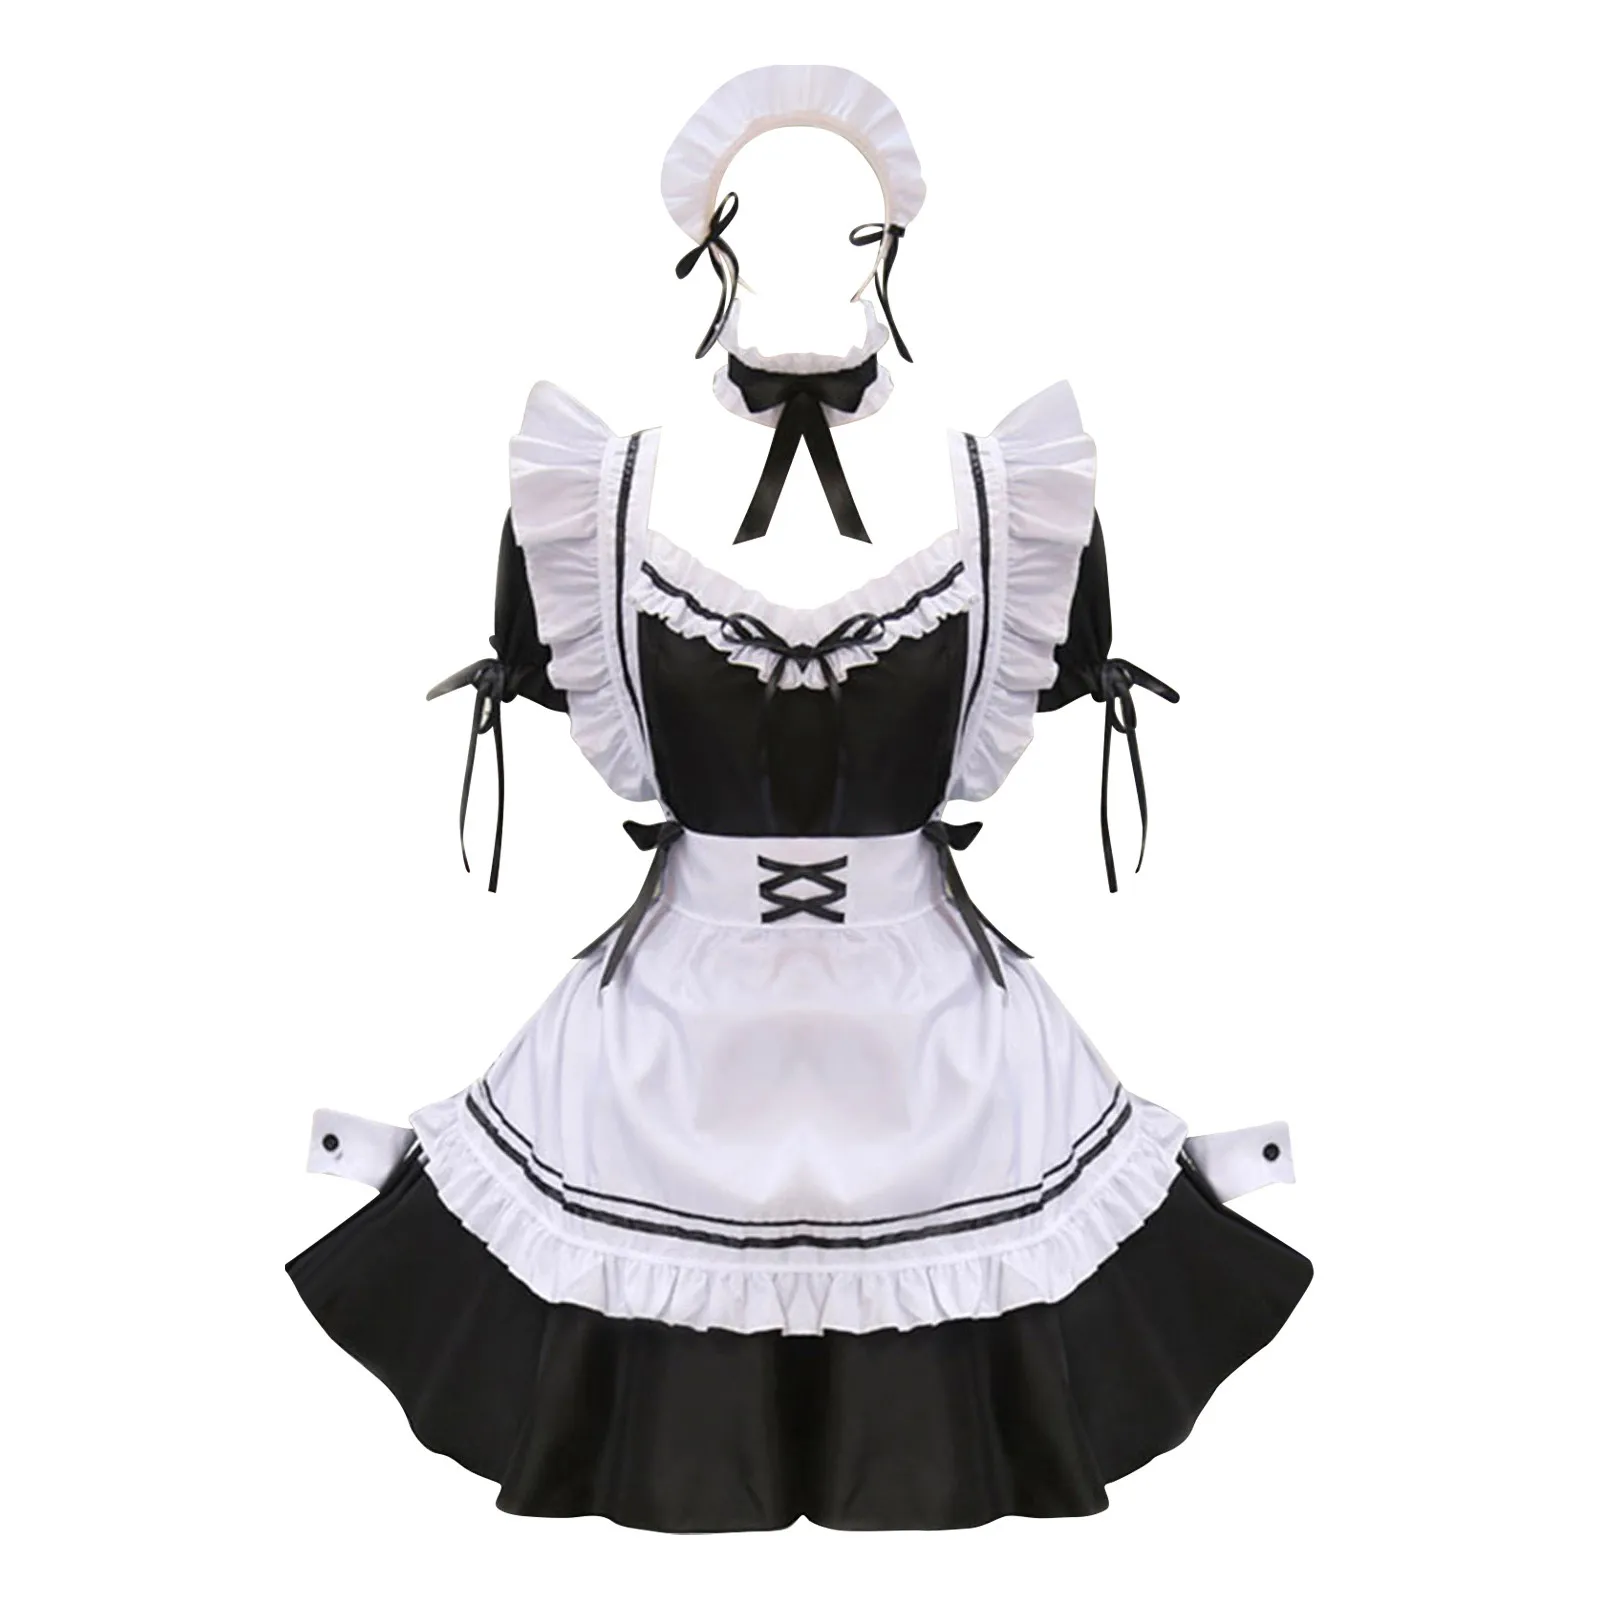 pirate costume women Women Lovely Maid Cosplay Costume Short Sleeve Retro Maid Lolita Dress Cute Japanese French Outfit Cosplay Costume Plus Size 3XL halloween outfits